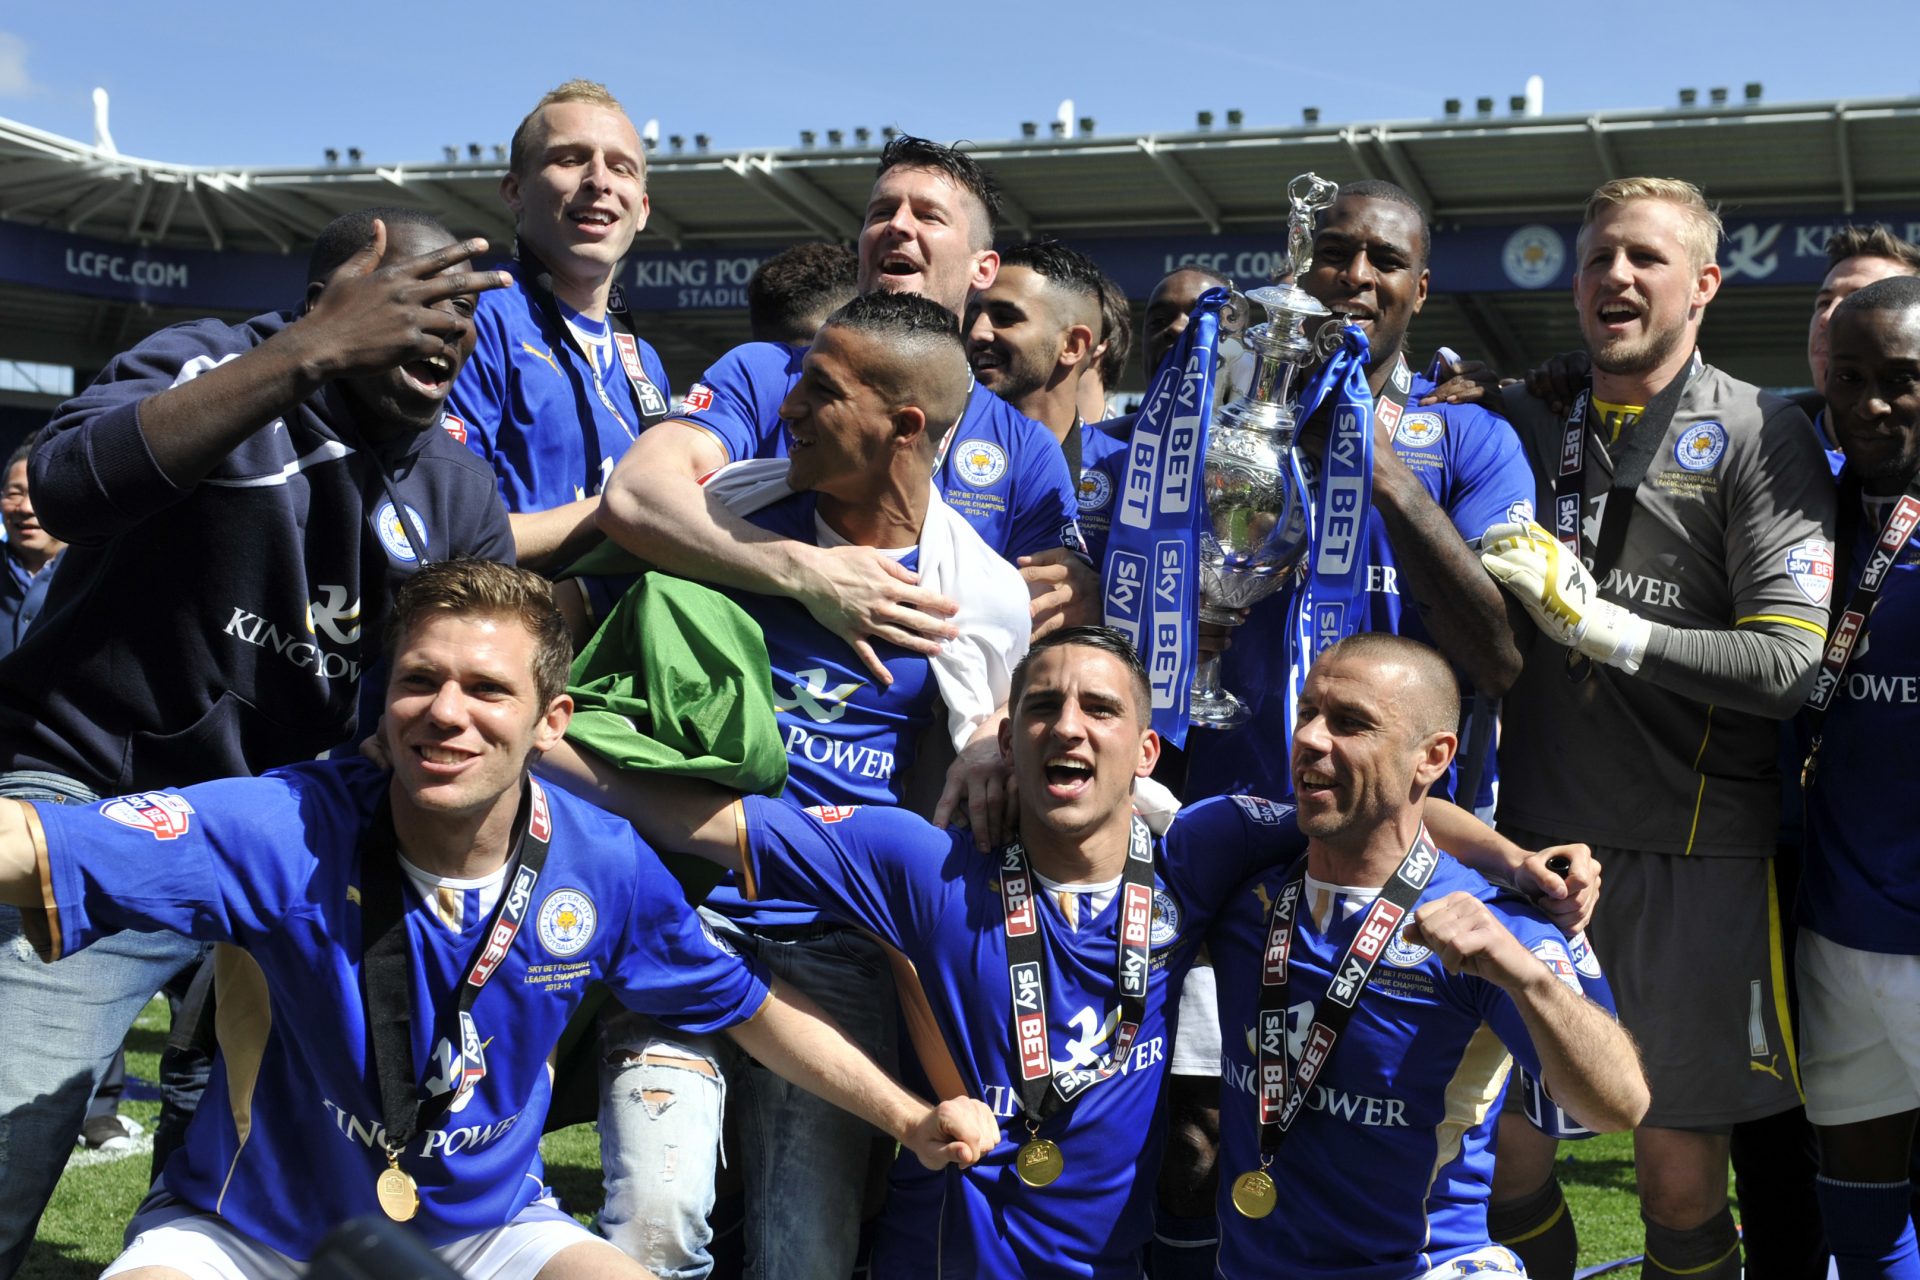 Leicester City, 2013/14 – 102 points